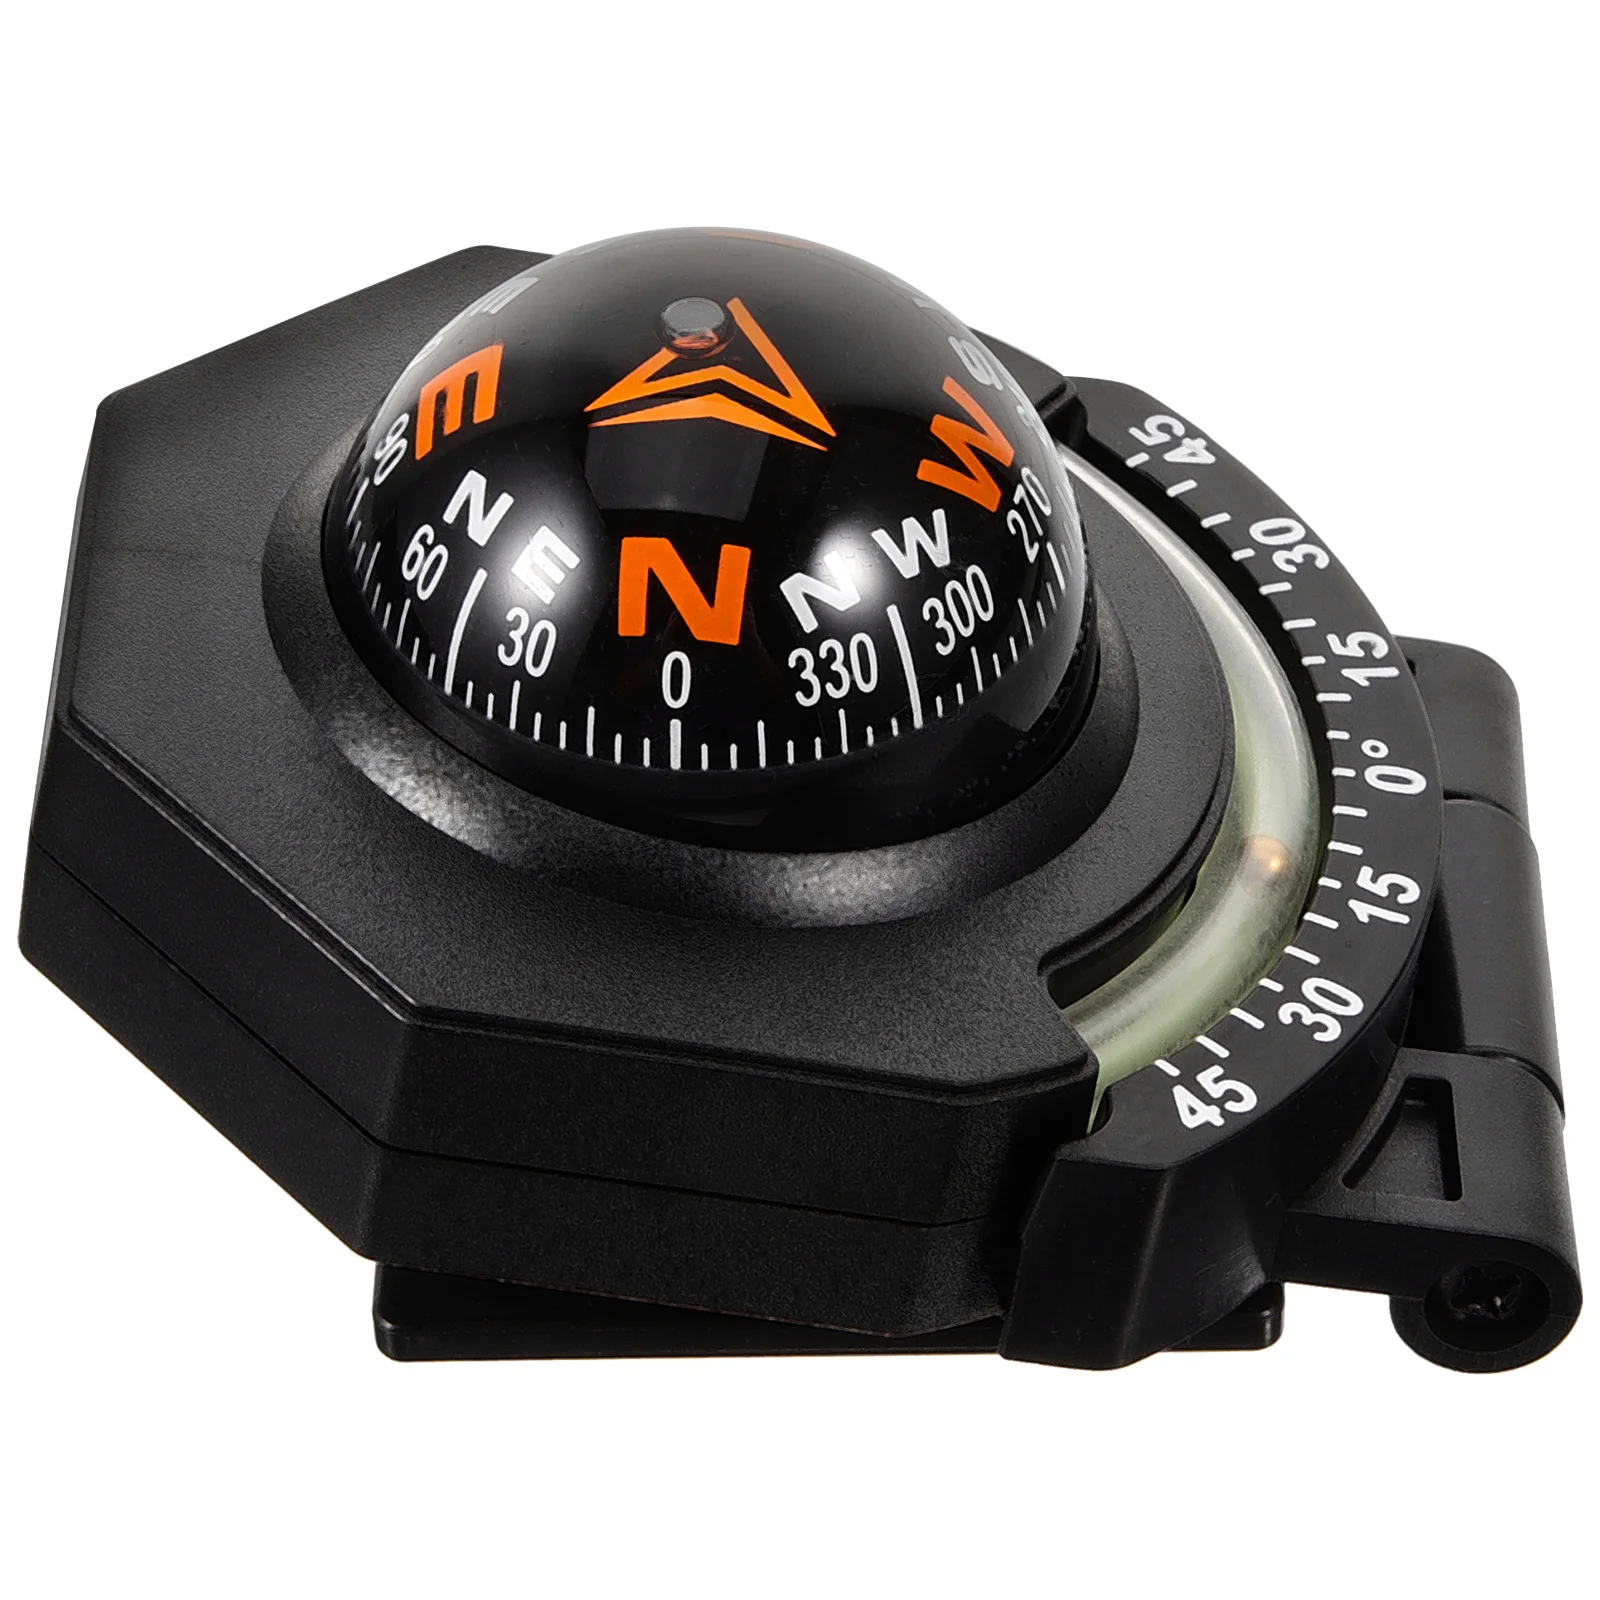 

Car Compass Ball Shaped Variable Navigation Dashboard Car Compass Direction Pointing Guide For Outdoor Car Boat Cycling Hiking